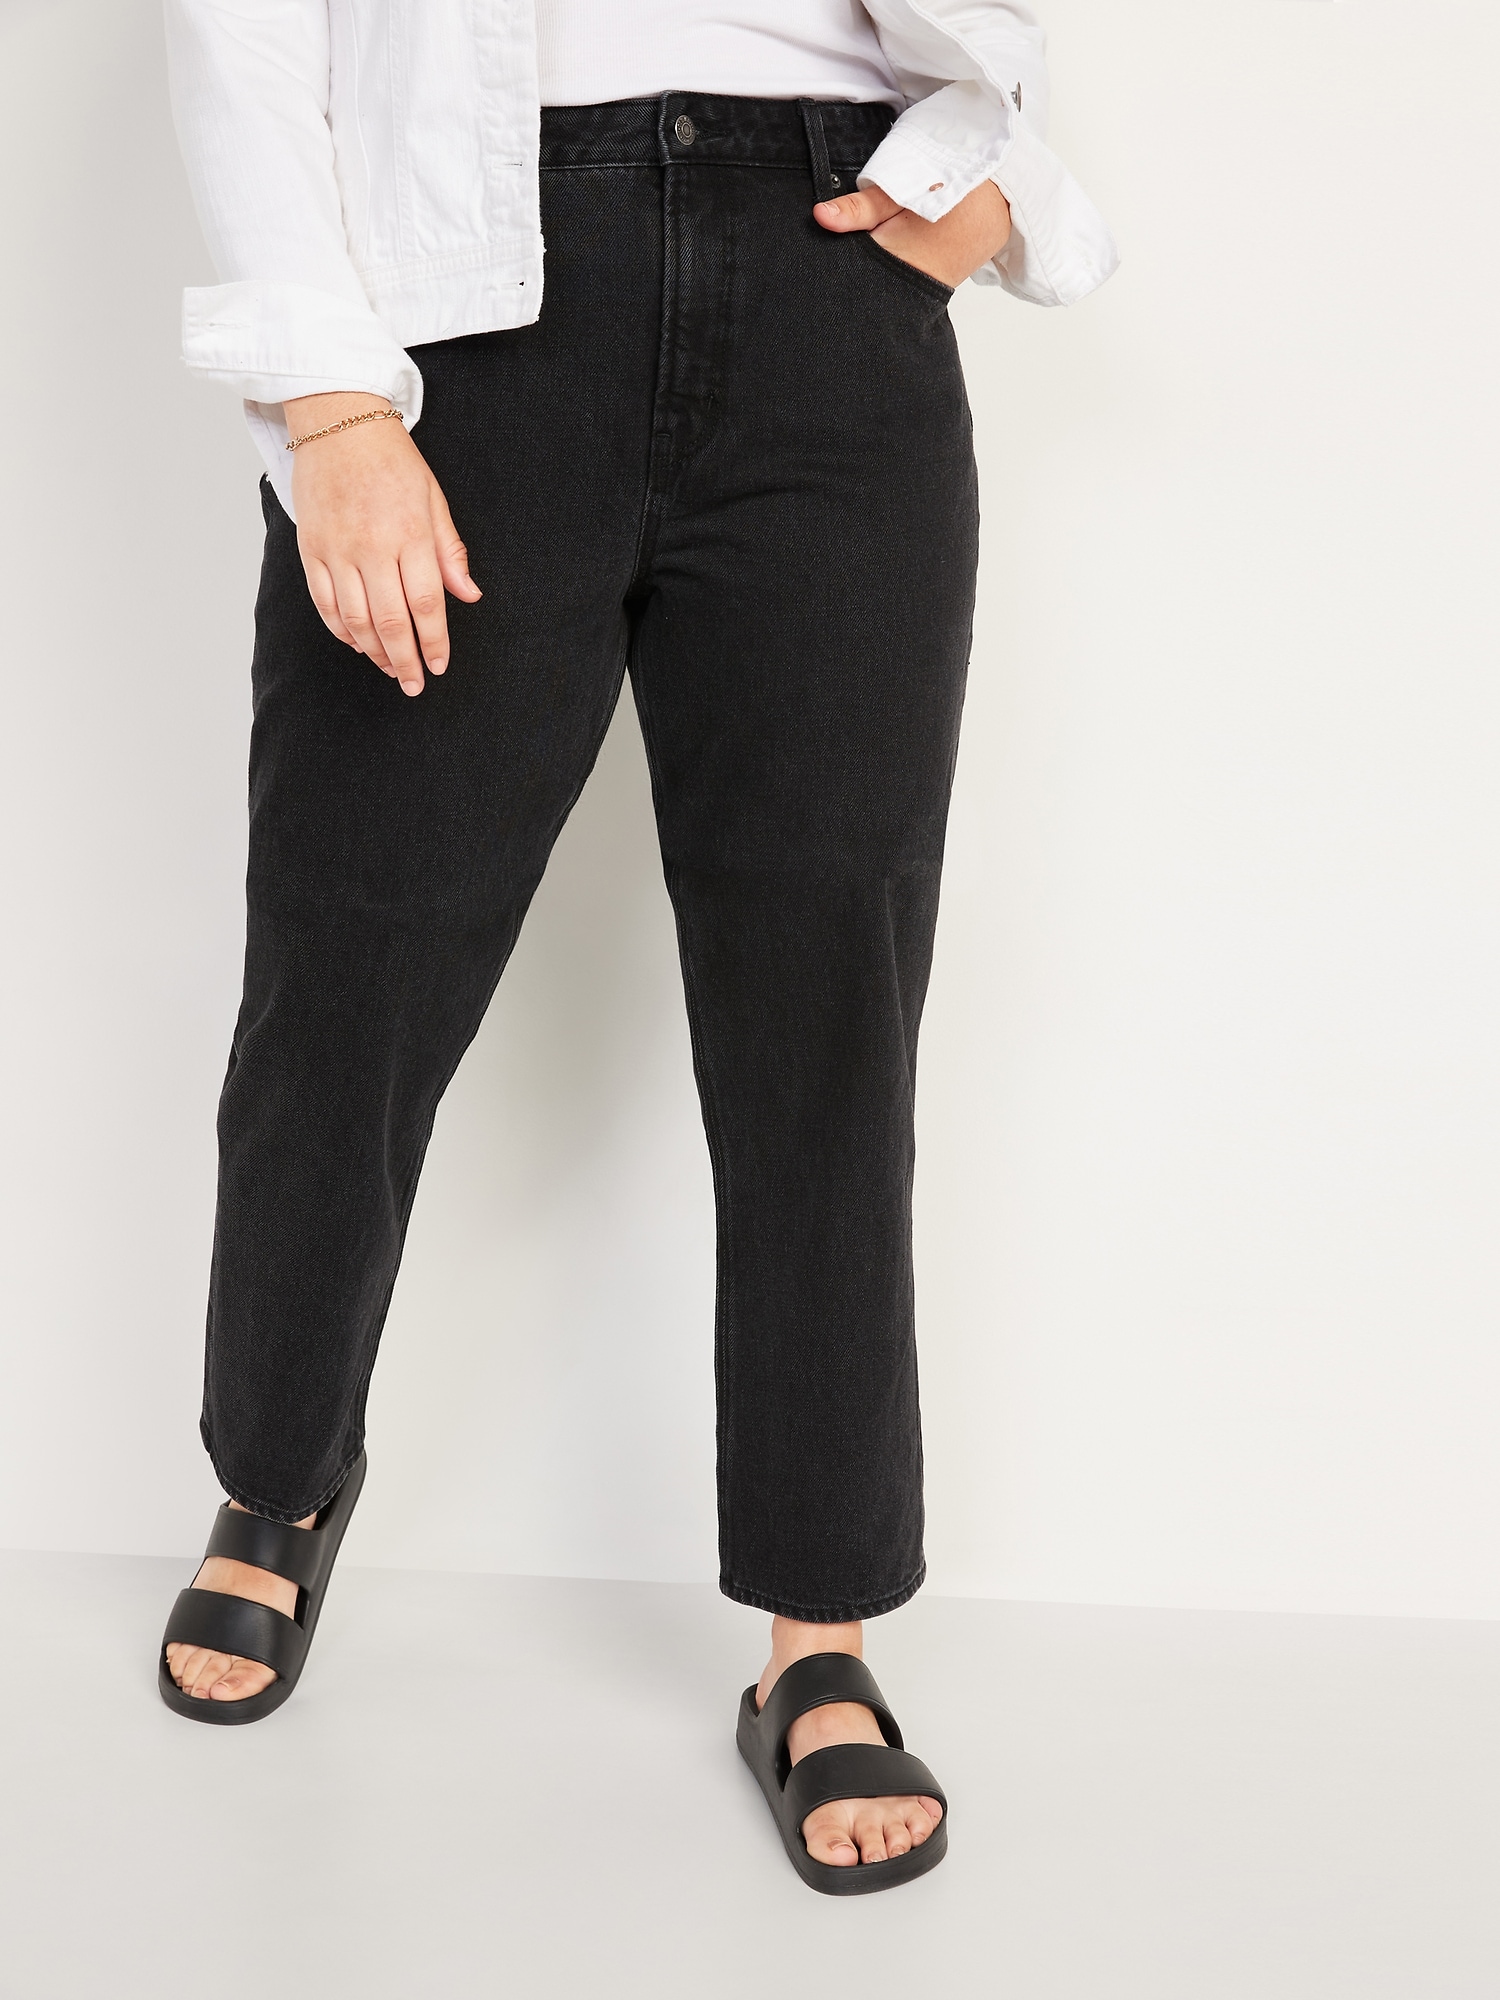 High-Waisted Slouchy Straight Cropped Black Jeans for Women